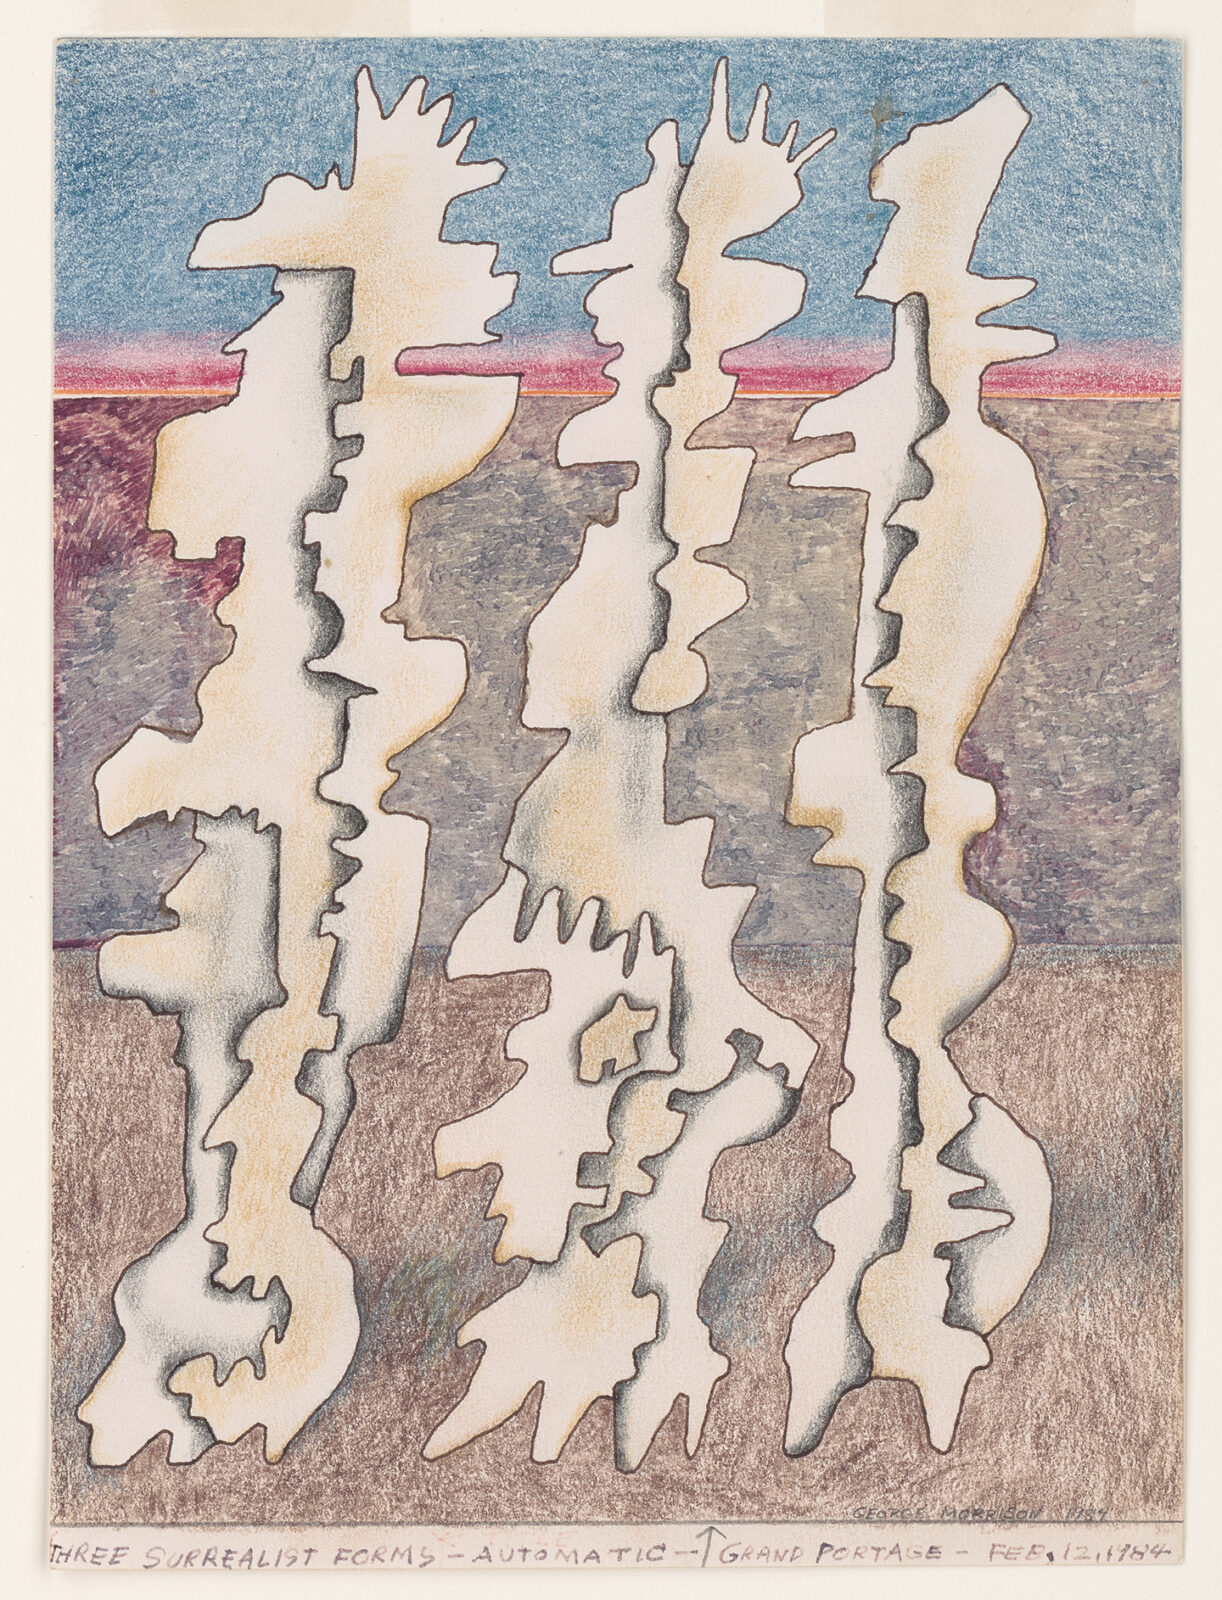 Three Surrealist Forms—Automatic, 1984 color pencil, ink, and wash on paper 10.5 x 7.75 inches